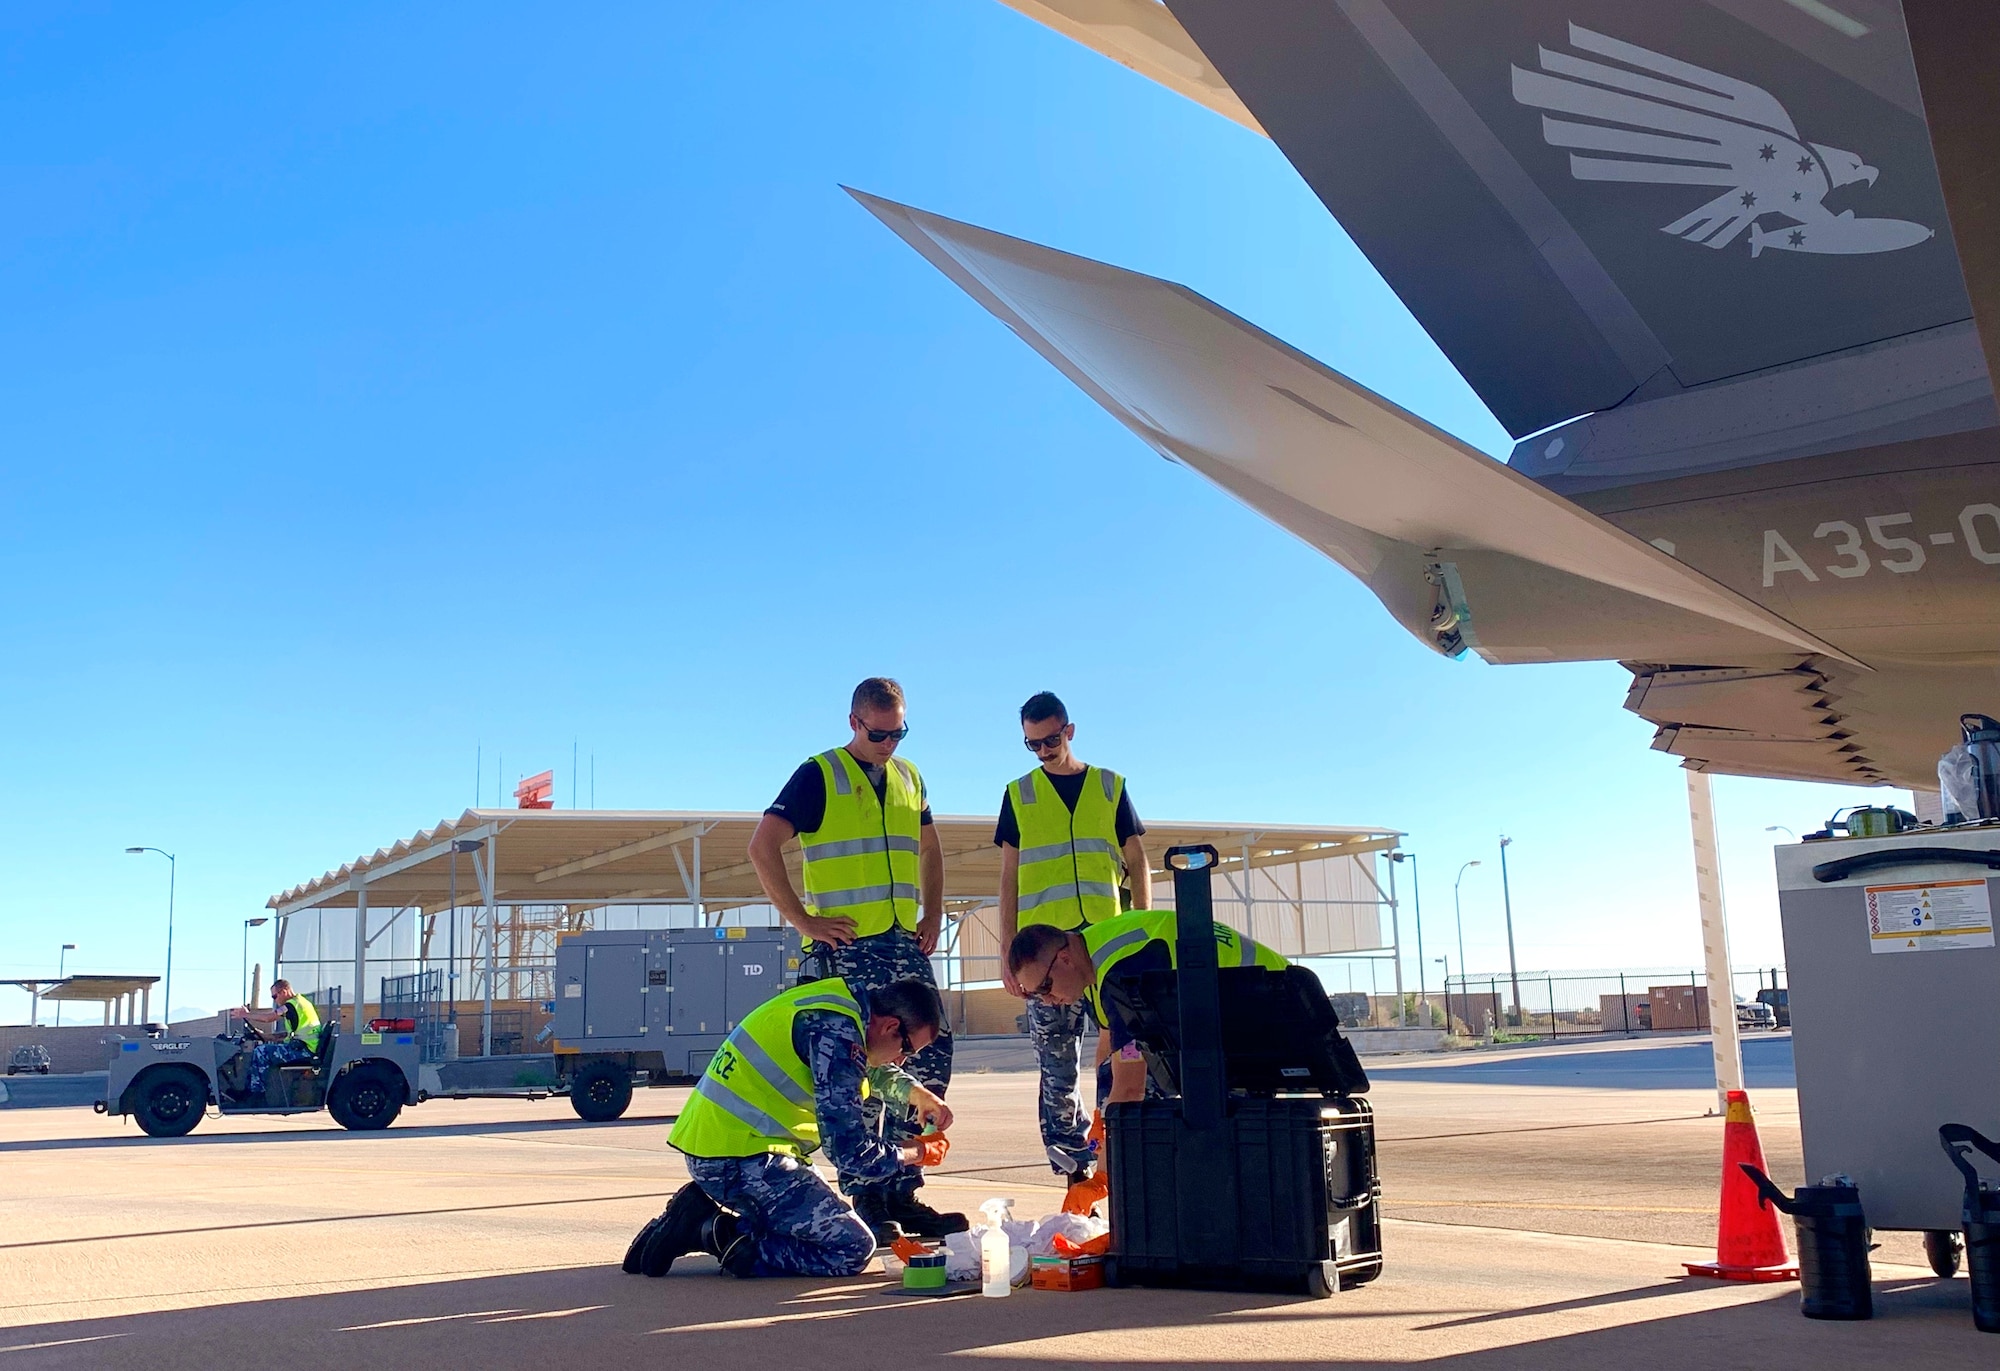 Royal Australian Air Force prepare to perform routine maintenance on an F-35A Lightning II take at Luke AFB Ariz., Nov. 28, 2018. Once completing maintenance, RAAF Airmen have been performing additional tasks over the past two months in preparation to send their first two RAAF F-35s to Australia. (U.S. Air Force photo by Staff Sgt. Jensen Stidham)